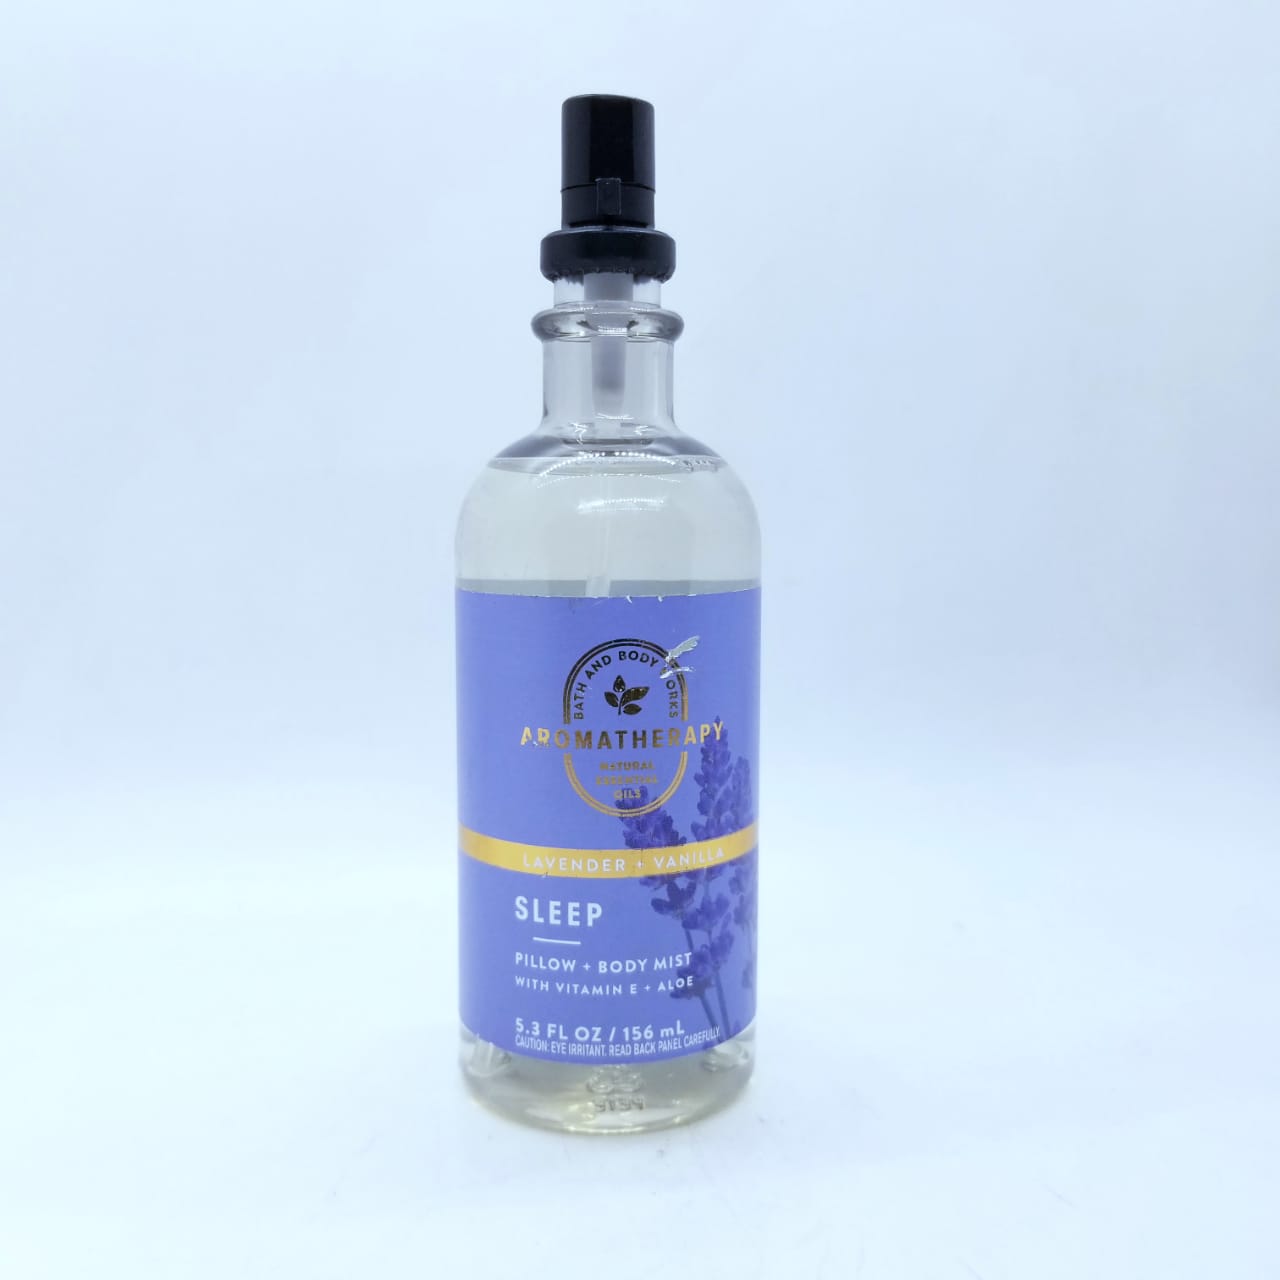 Essential Oil Mist, with Natural Essential Oils, Aromatherapy, 156ml, Bath & Body Works